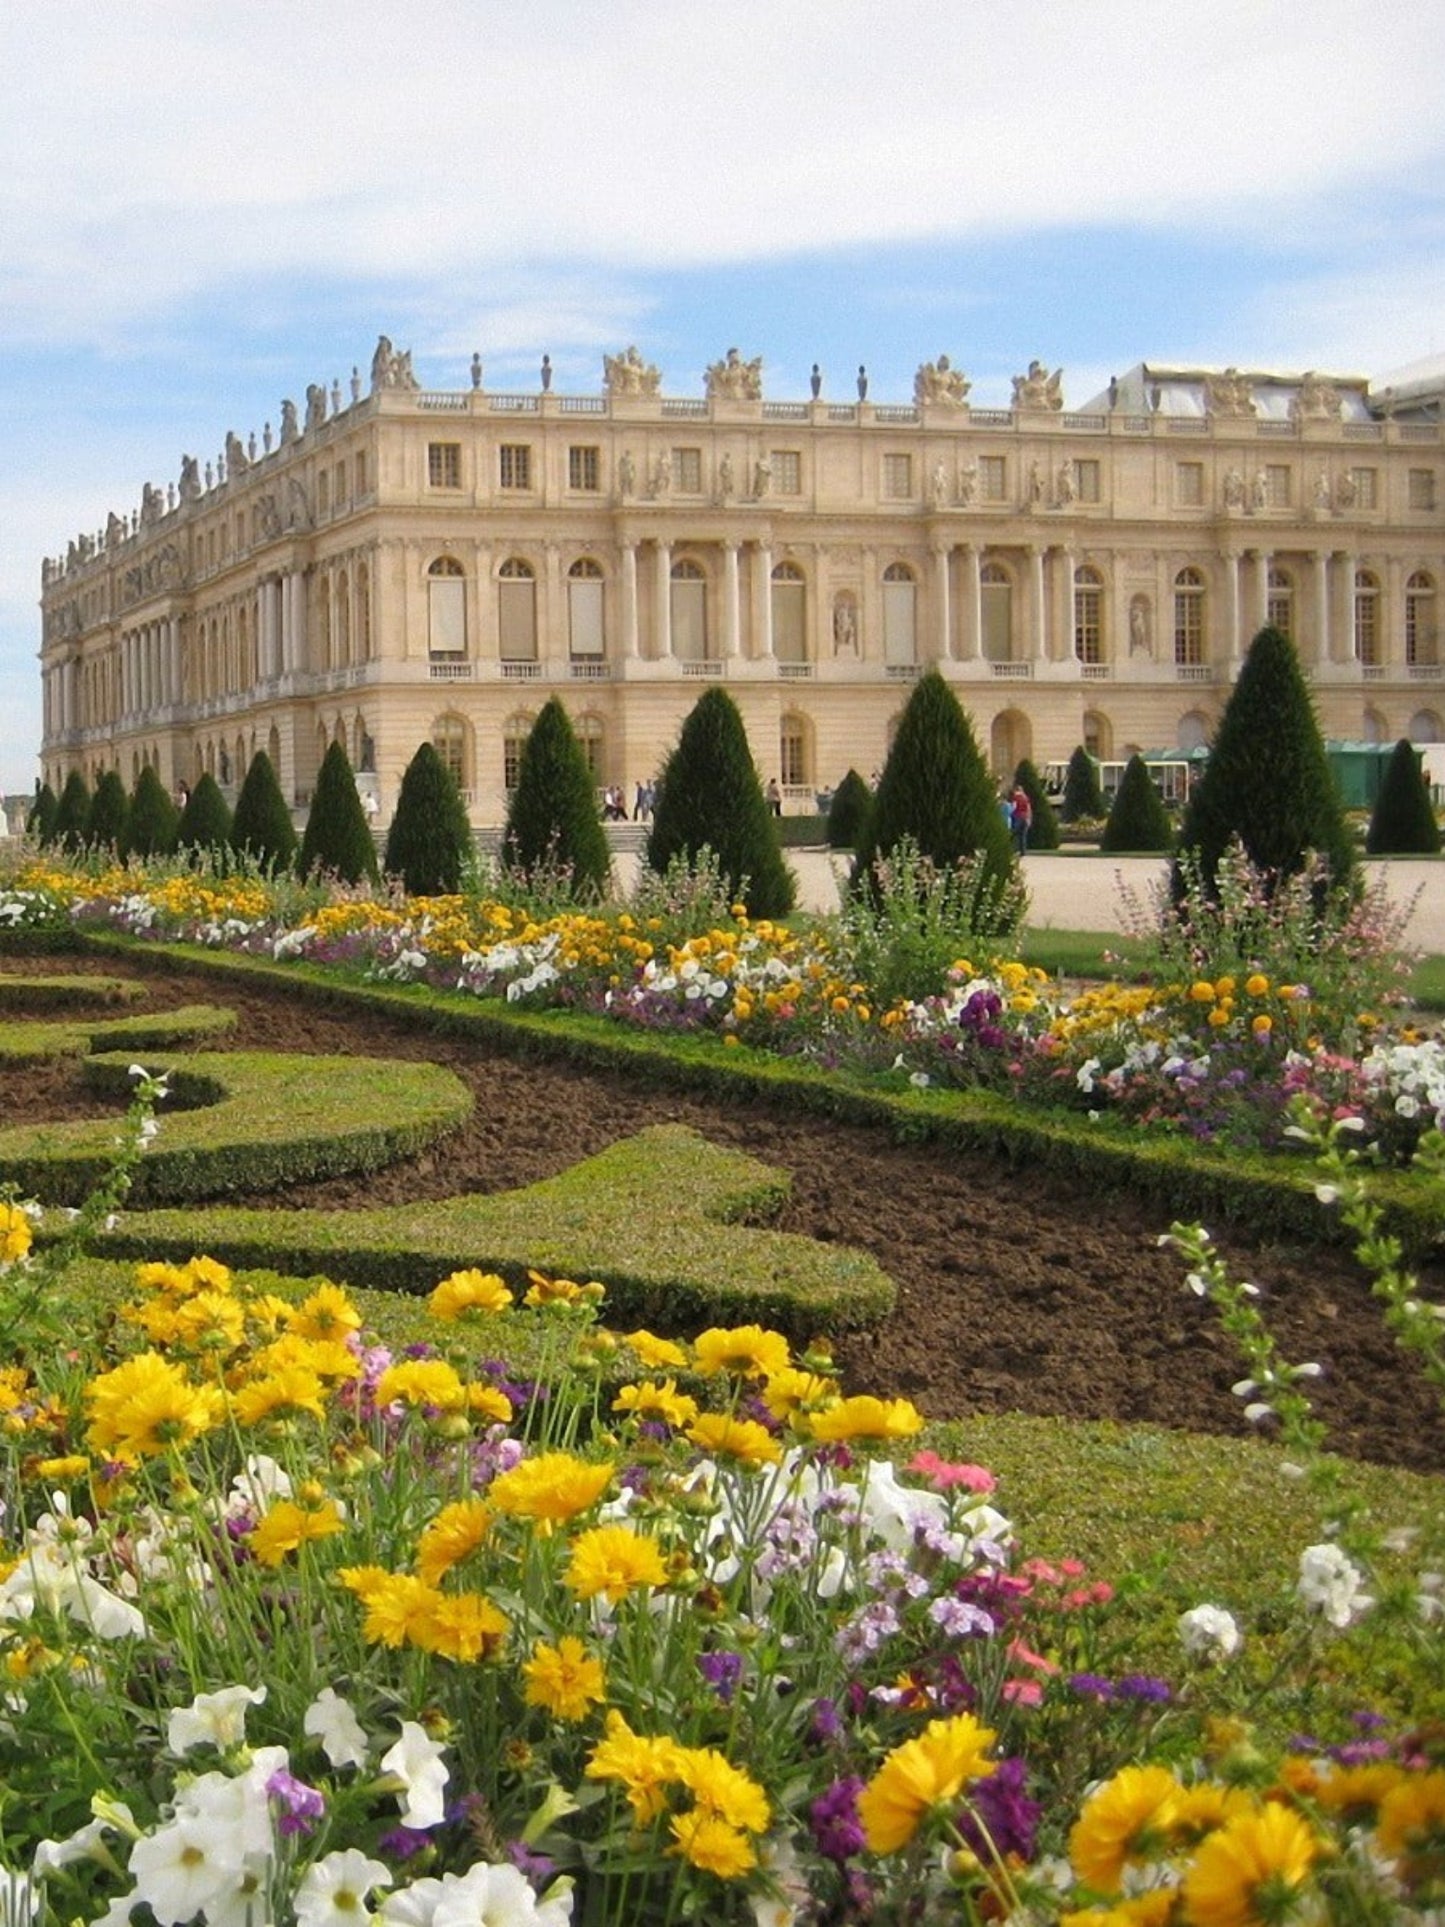 Magnificent Palace Of Versailles, The Extraordinary Destiny Of The Sun King - Private Tour